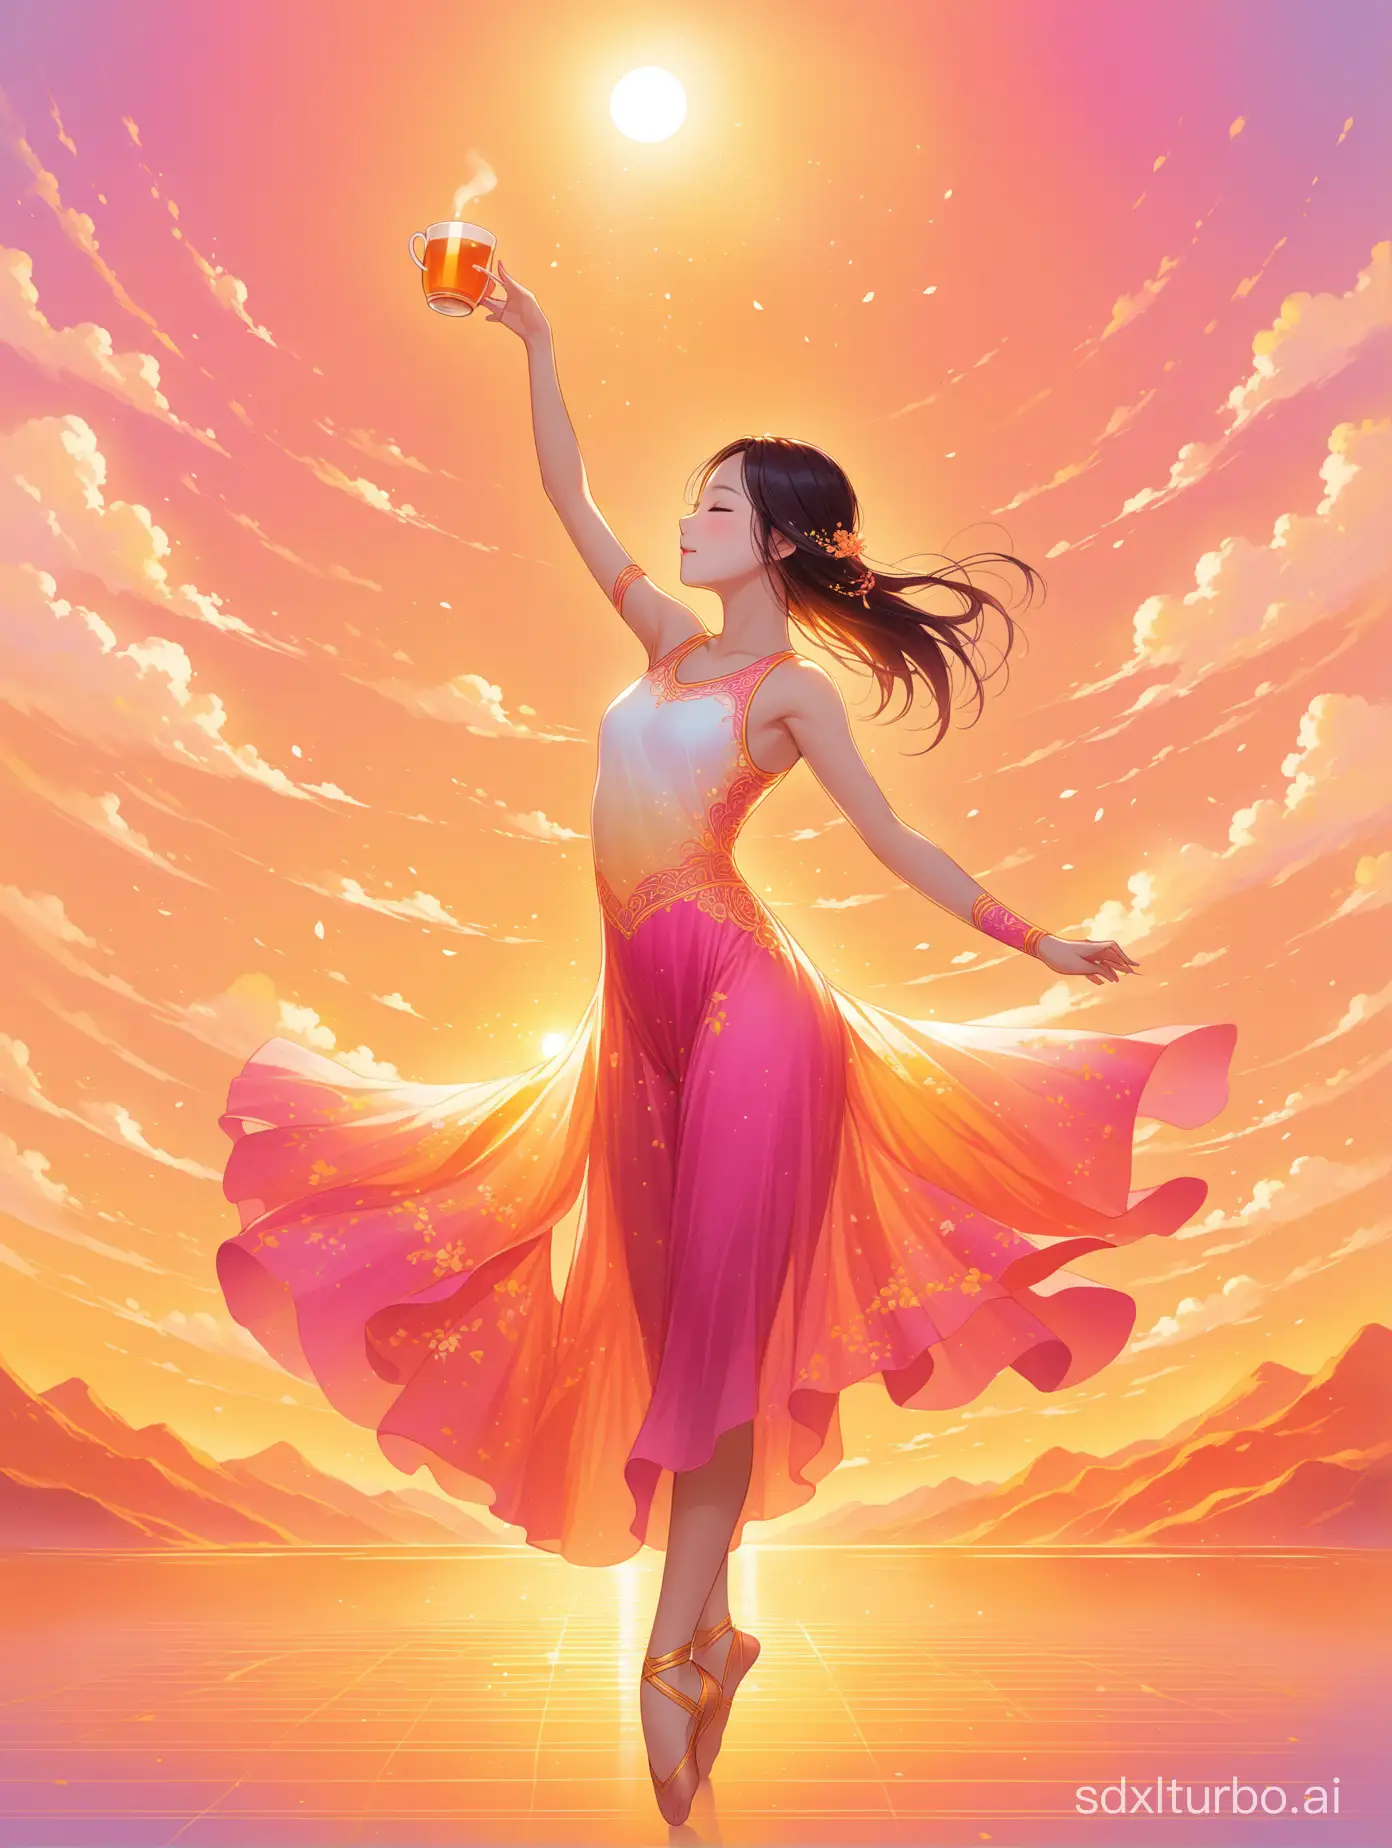 Dancer in the Dawn - The cover features a young Chinese girl dancing gracefully in the first light of the morning sun. She is dressed in a light, flowing dance attire, holding a cup of freshly brewed tea, with a face full of anticipation and vitality for the new day. The background is a warm gradient of orange and pink, creating an atmosphere of hope and vibrancy.